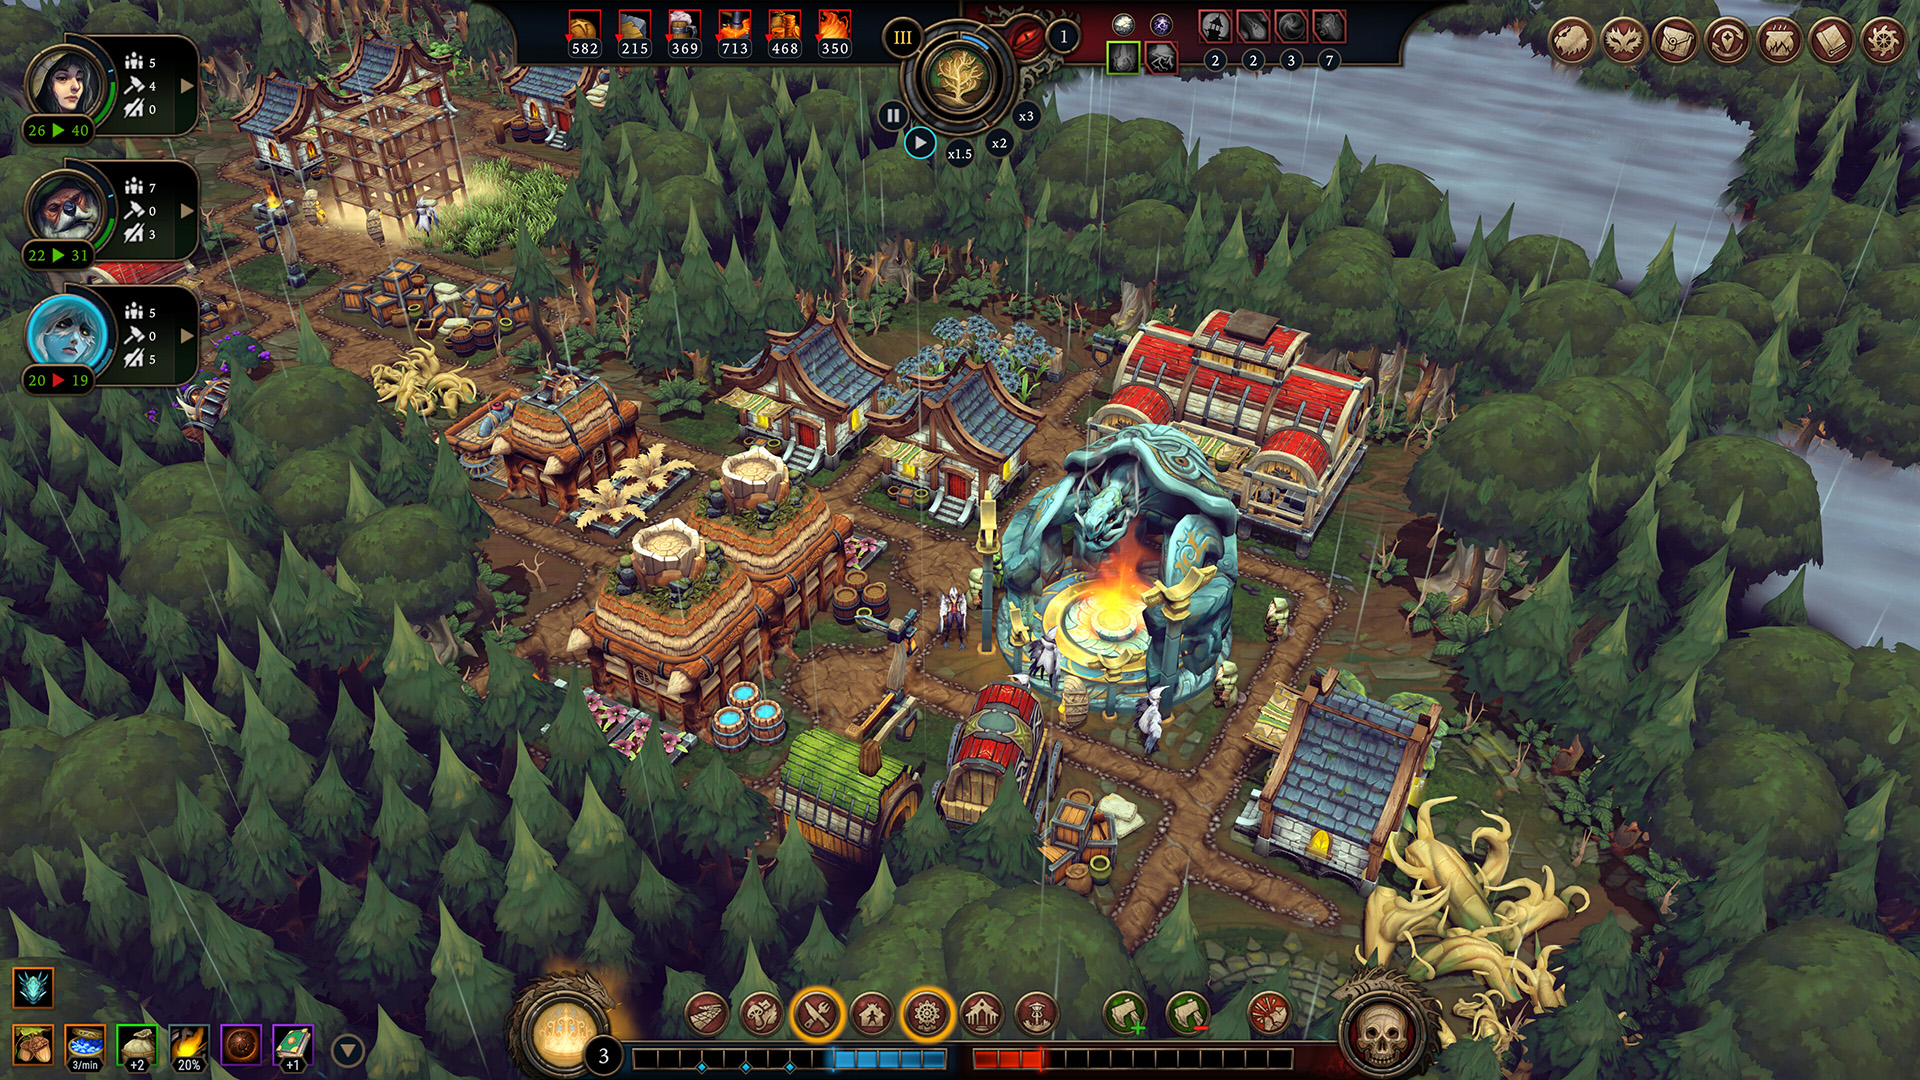 Hugely popular Steam city builder Against the Storm coming to PC